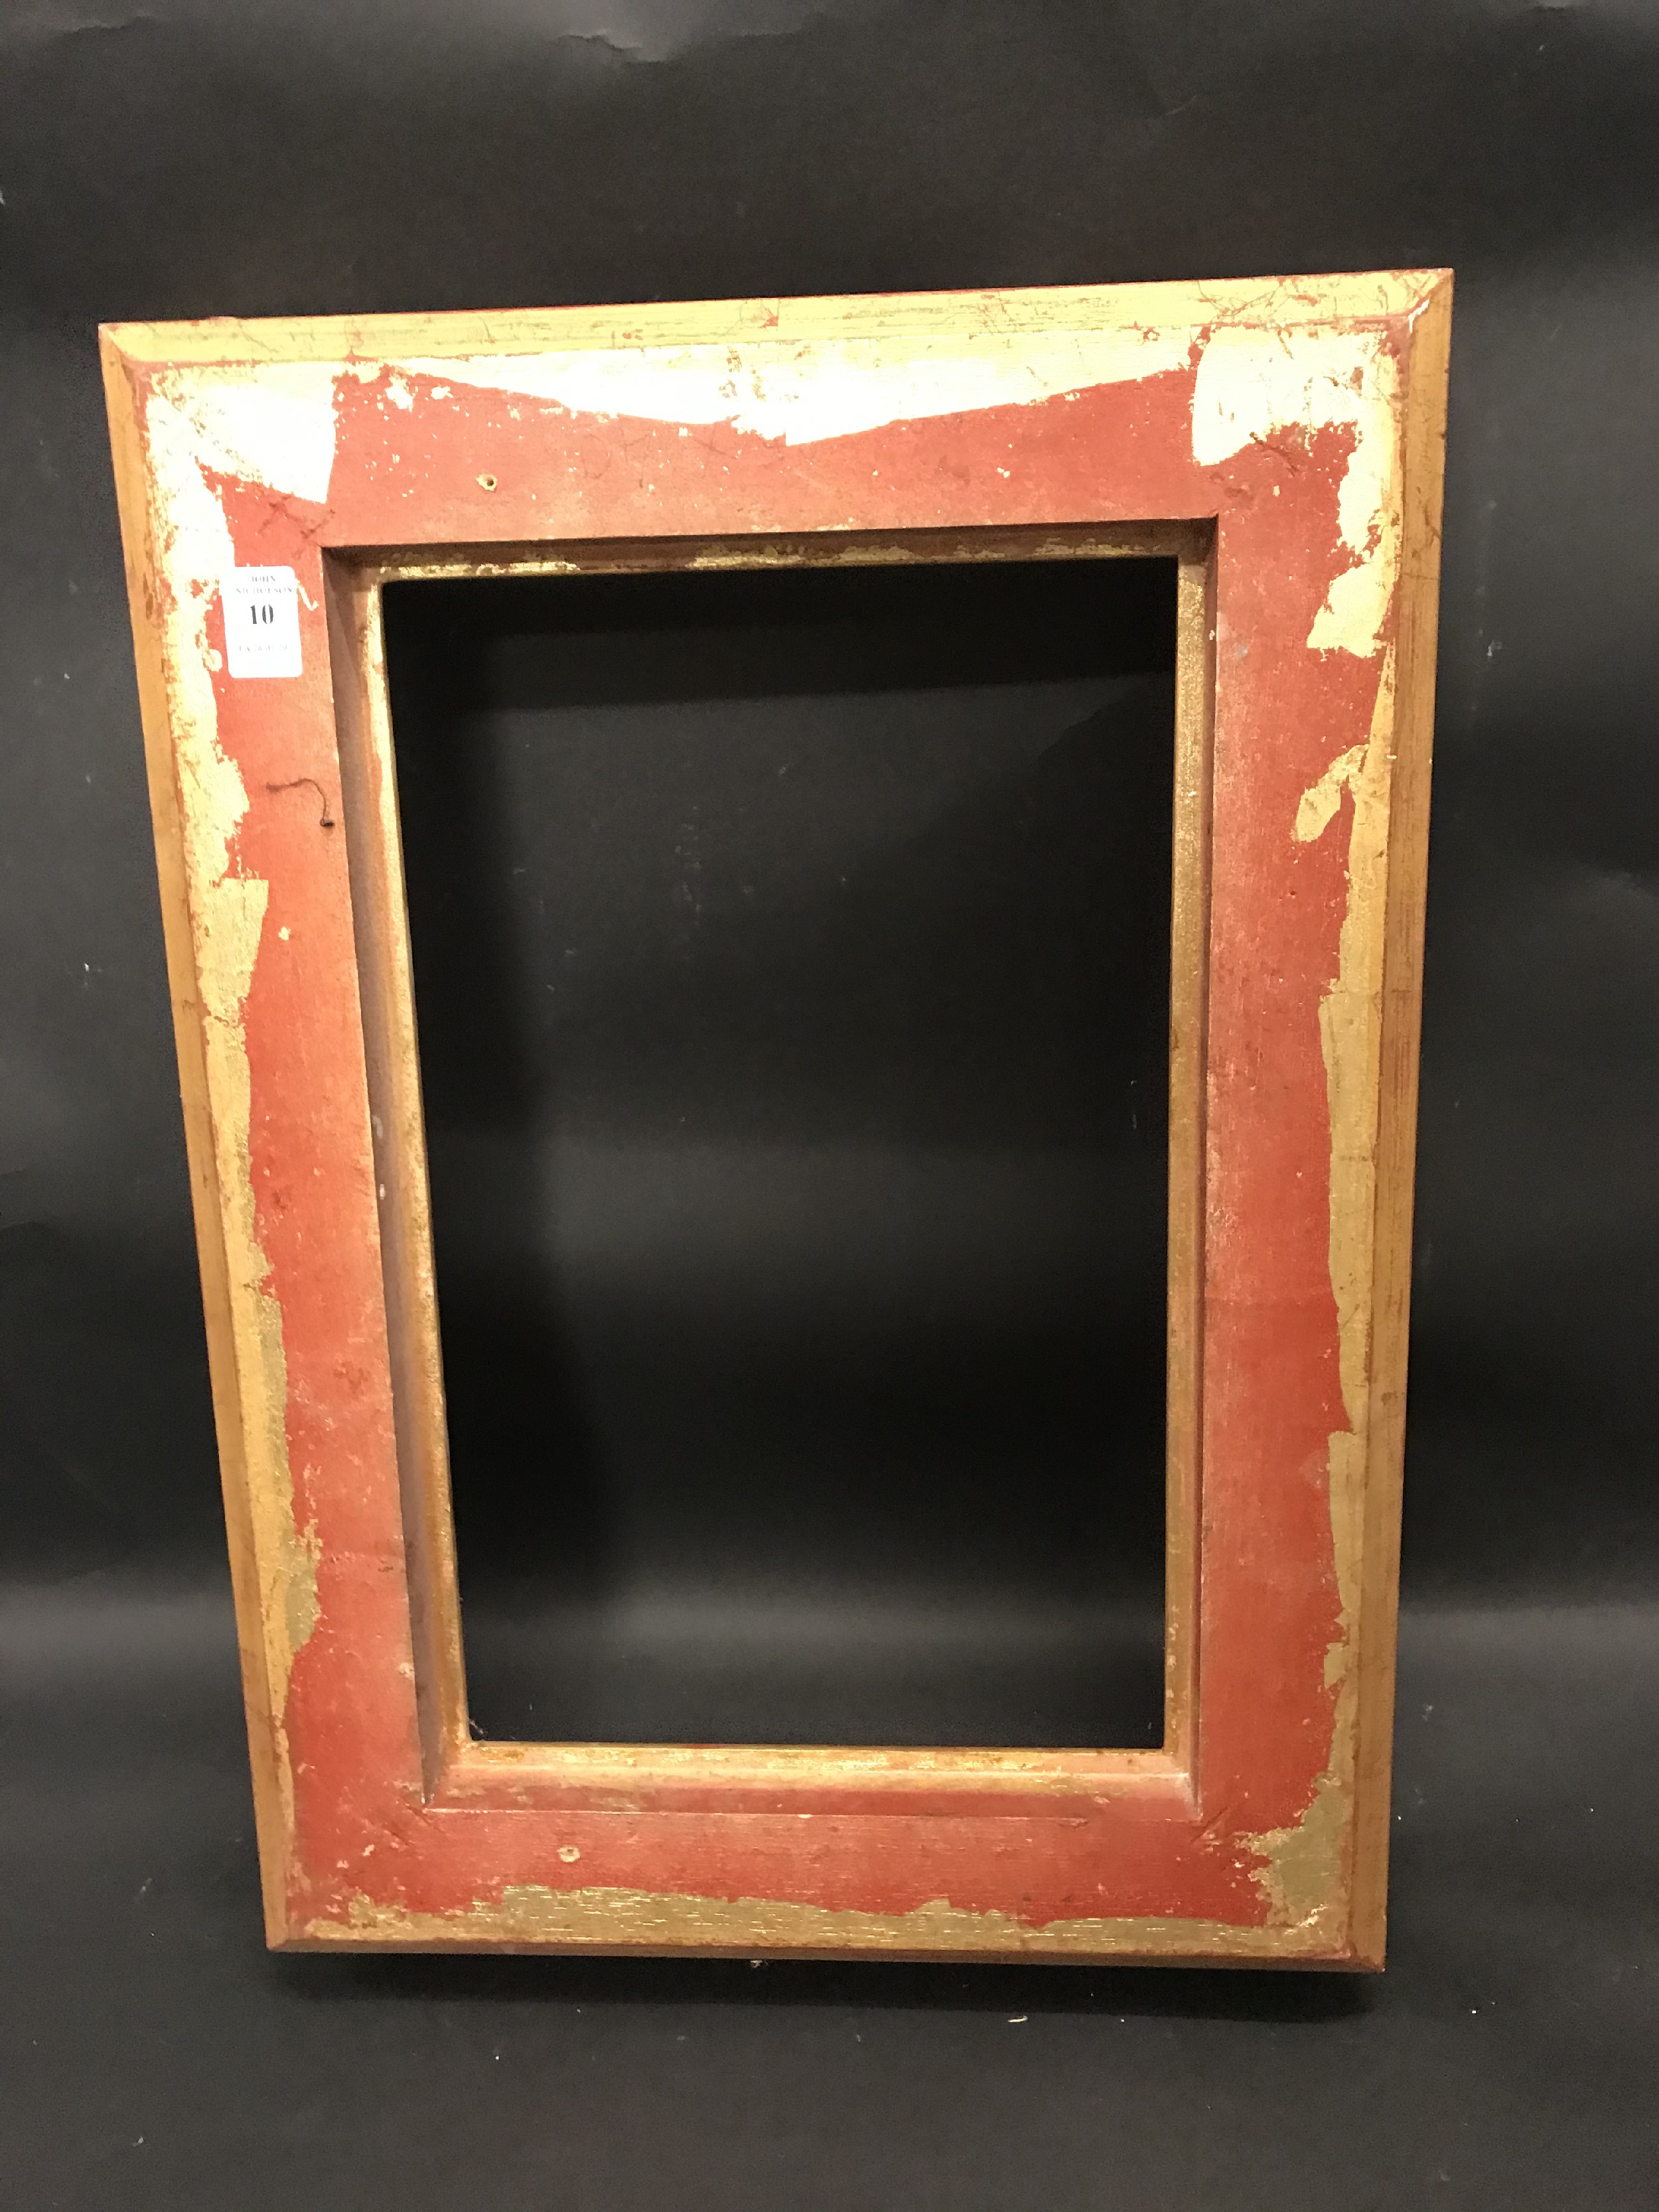 20th Century English School. A Gilt Composition Frame, with swept centres, 15.75" x 10" (rebate). - Image 3 of 3